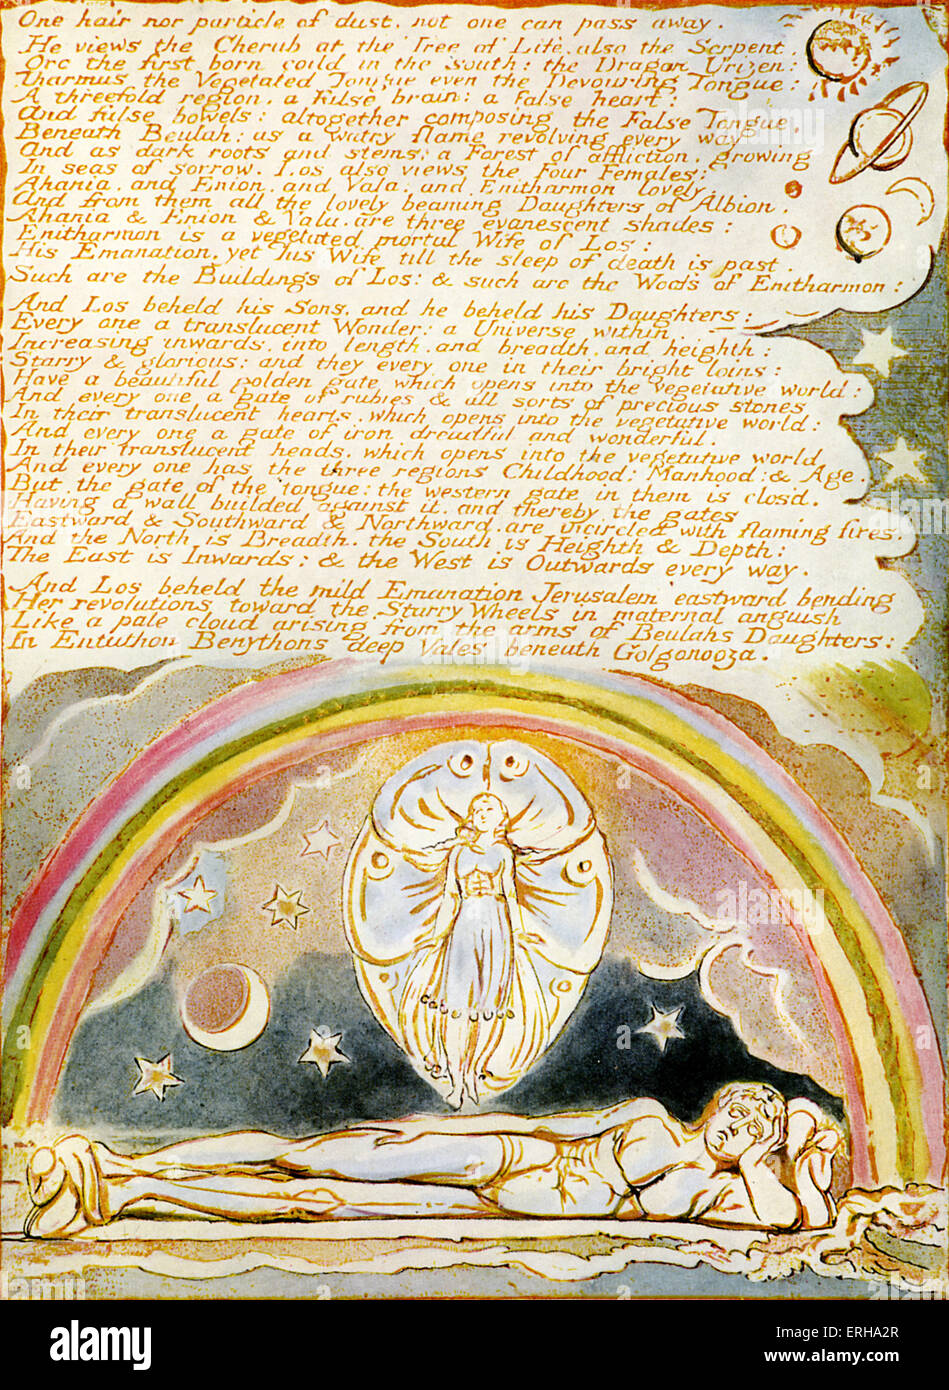 Enitharmon hovering over the sleeping Los, from page 14 of the poem 'Jerusalem' by William Blake, 1804-1820. English poet, Stock Photo